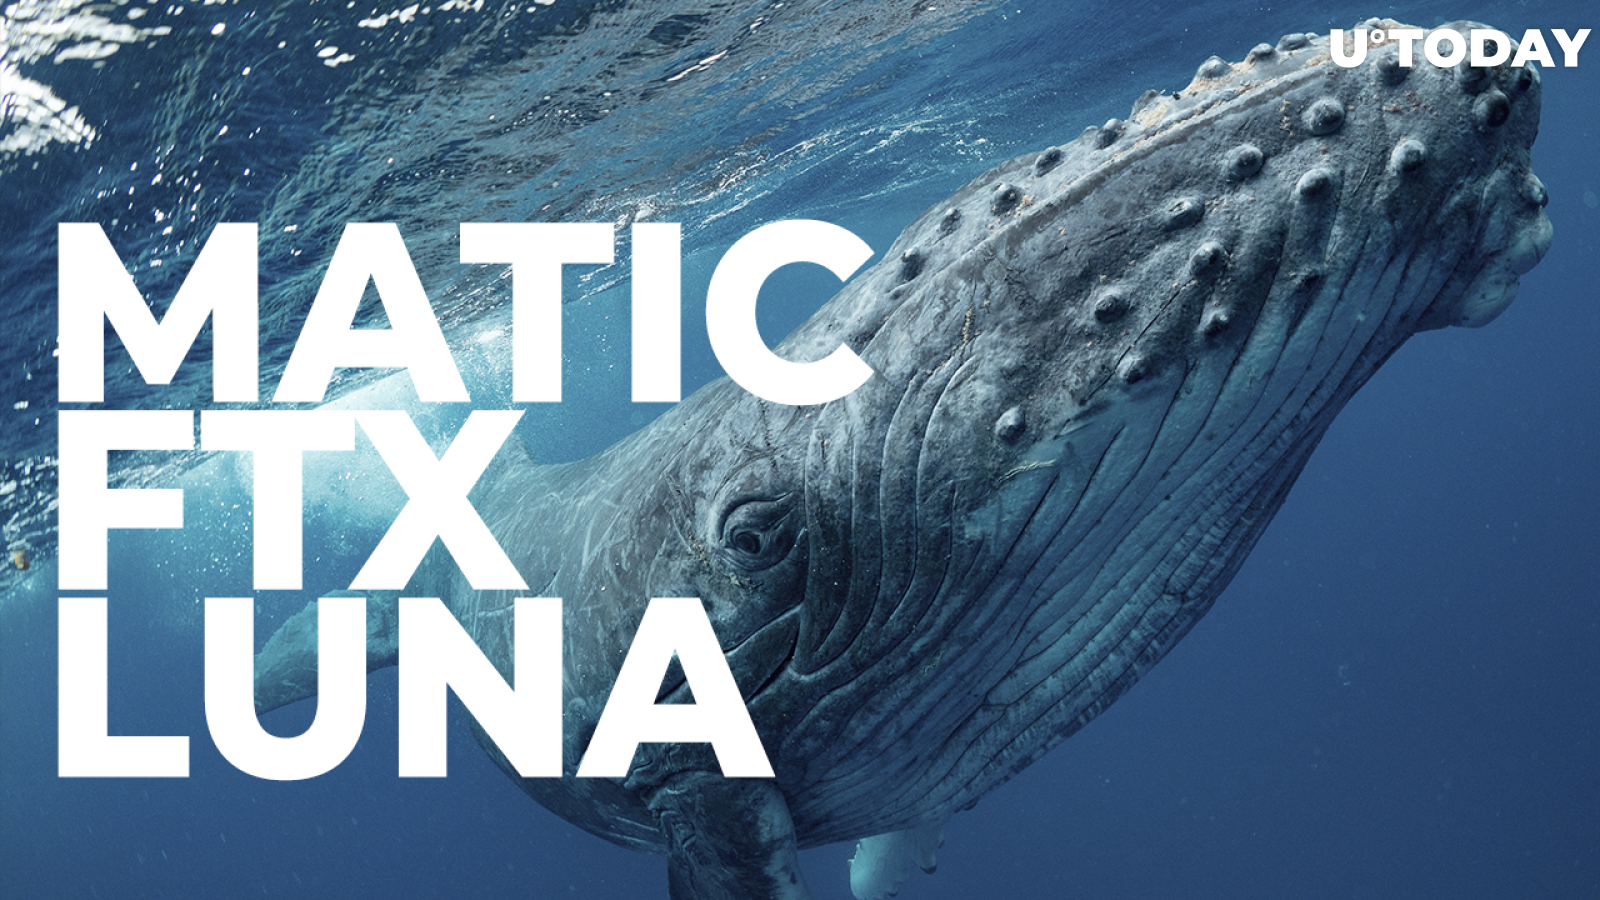 More MATIC, FTX Token, LUNA Bought by Whales as They Keep Betting on These Coins